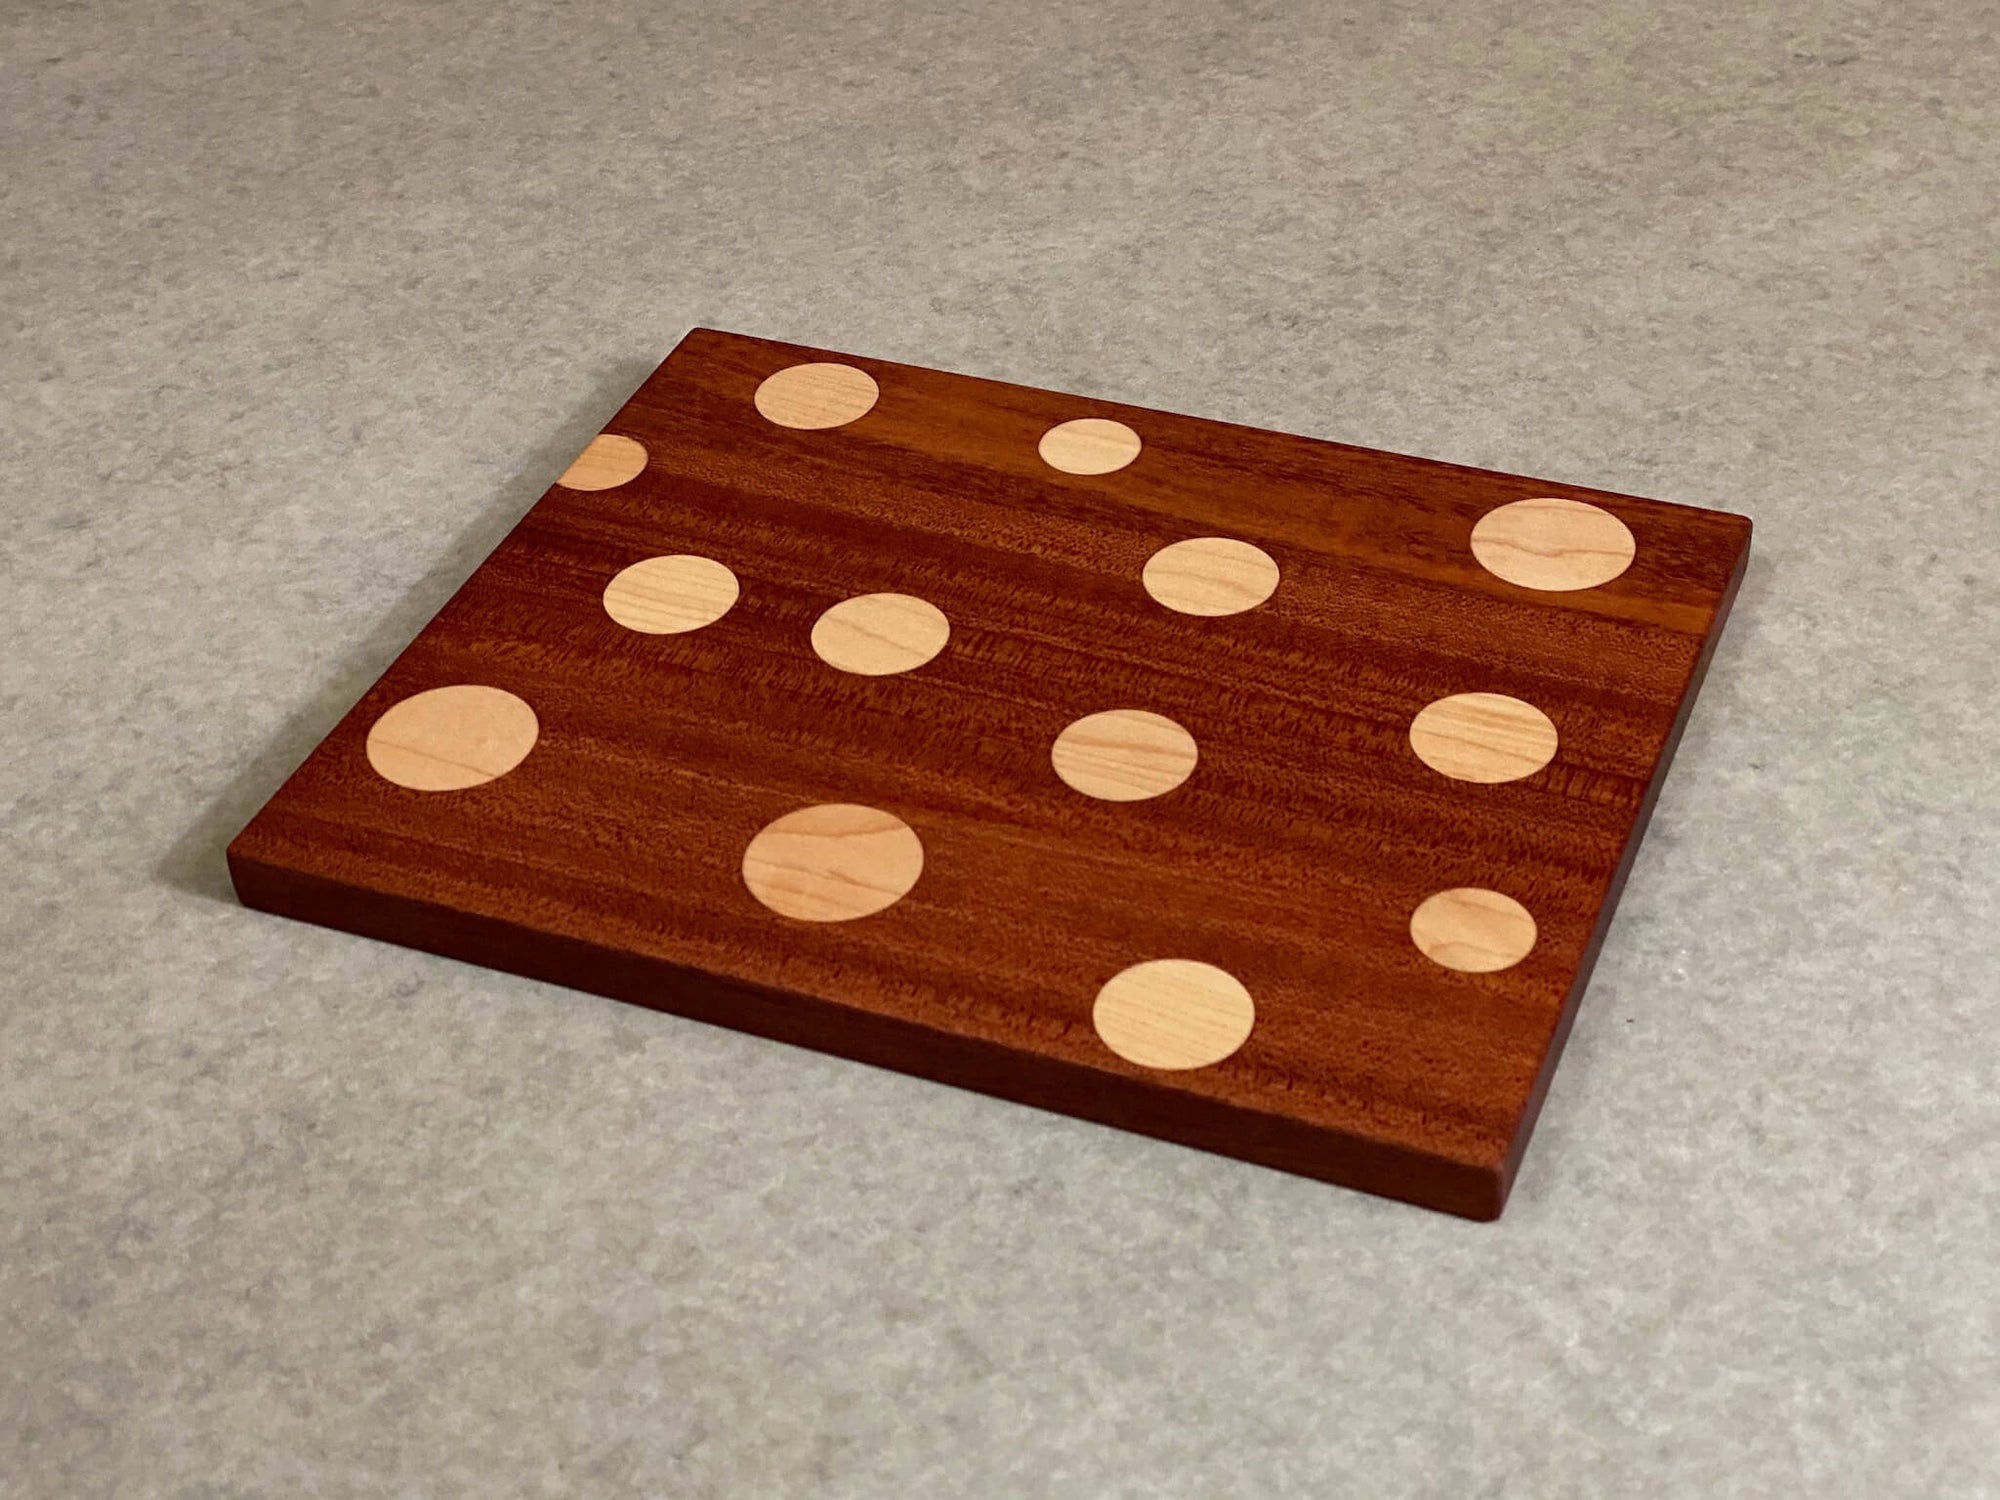 Small rectangular board of walnut with inlaid polka dots of maple. Pattern is on both sides.